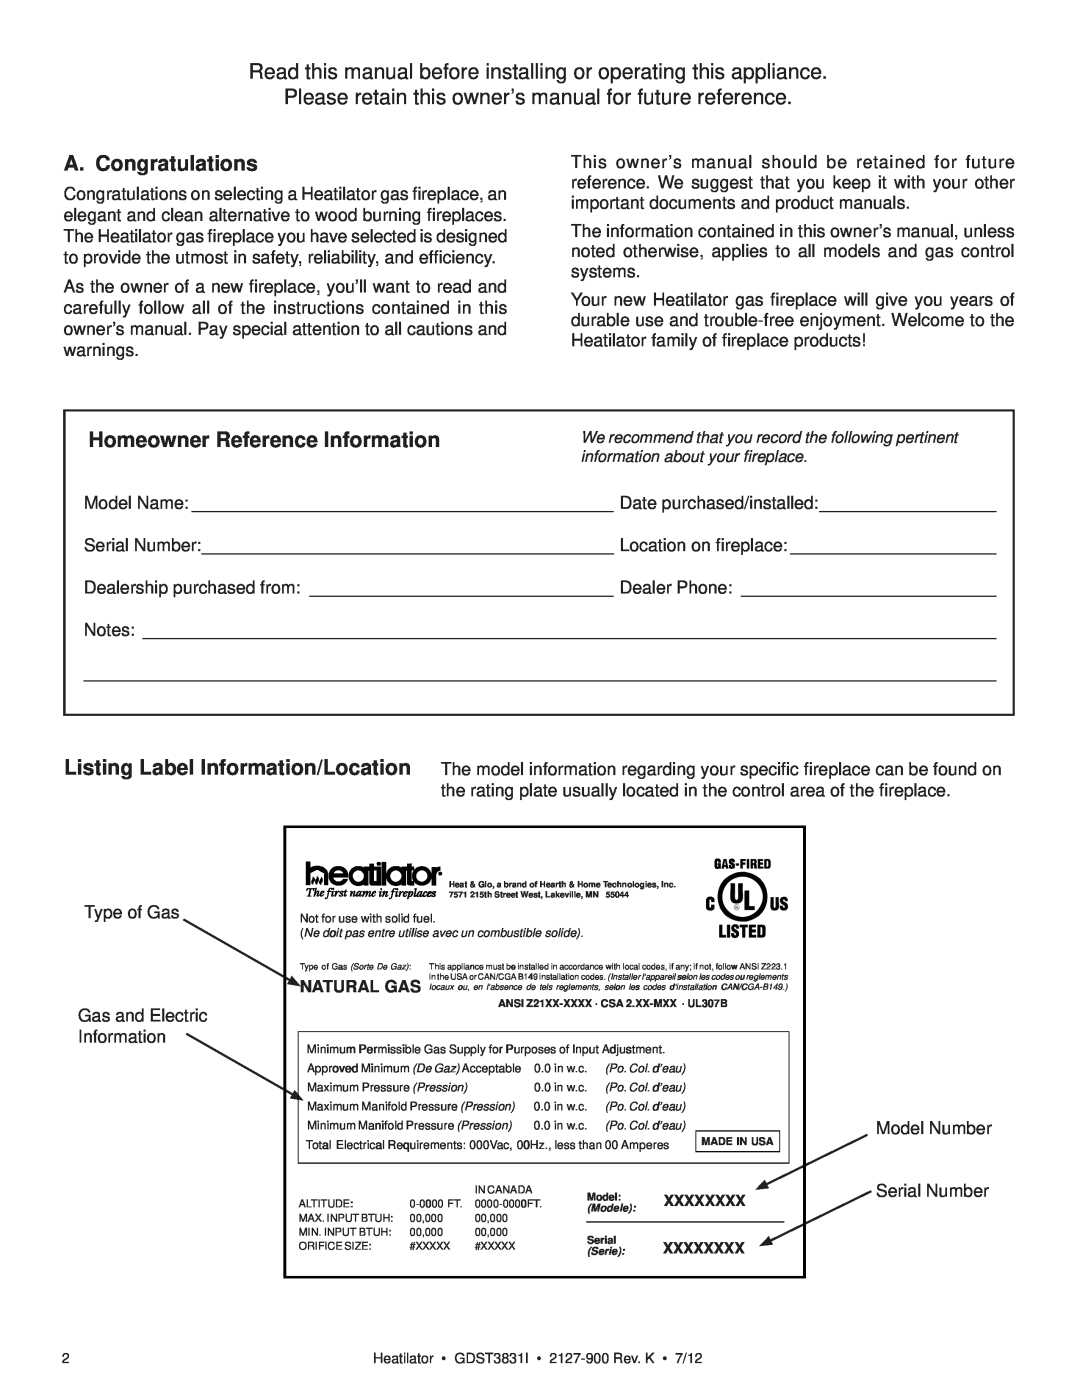 Heatiator GDST3831I owner manual A. Congratulations, Homeowner Reference Information 